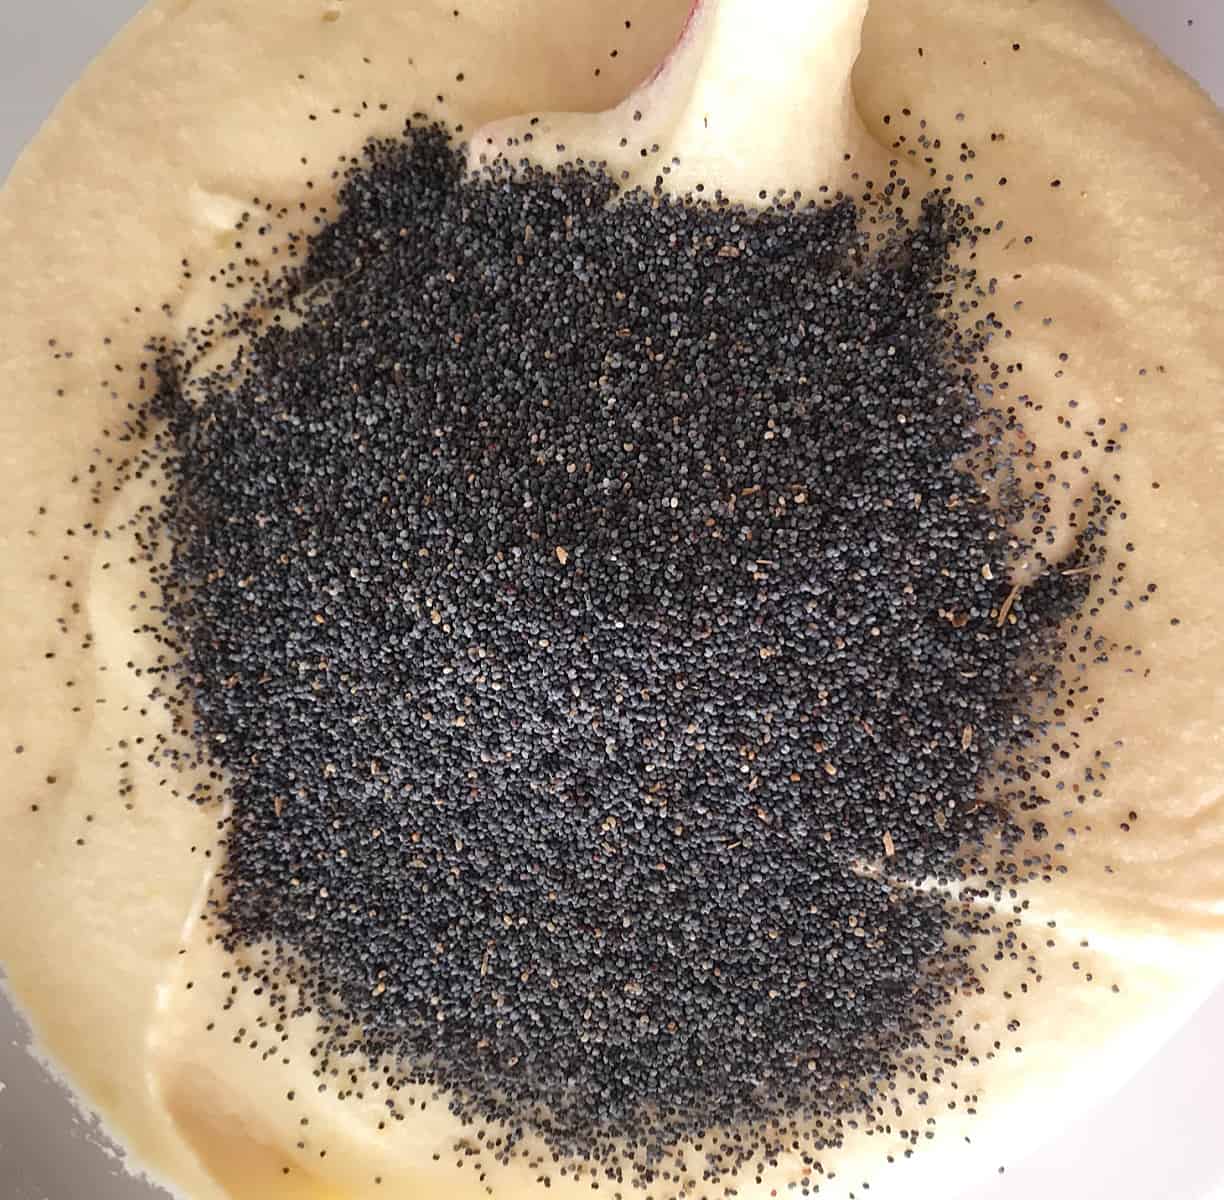 Yellow Cake batter with poppy seeds